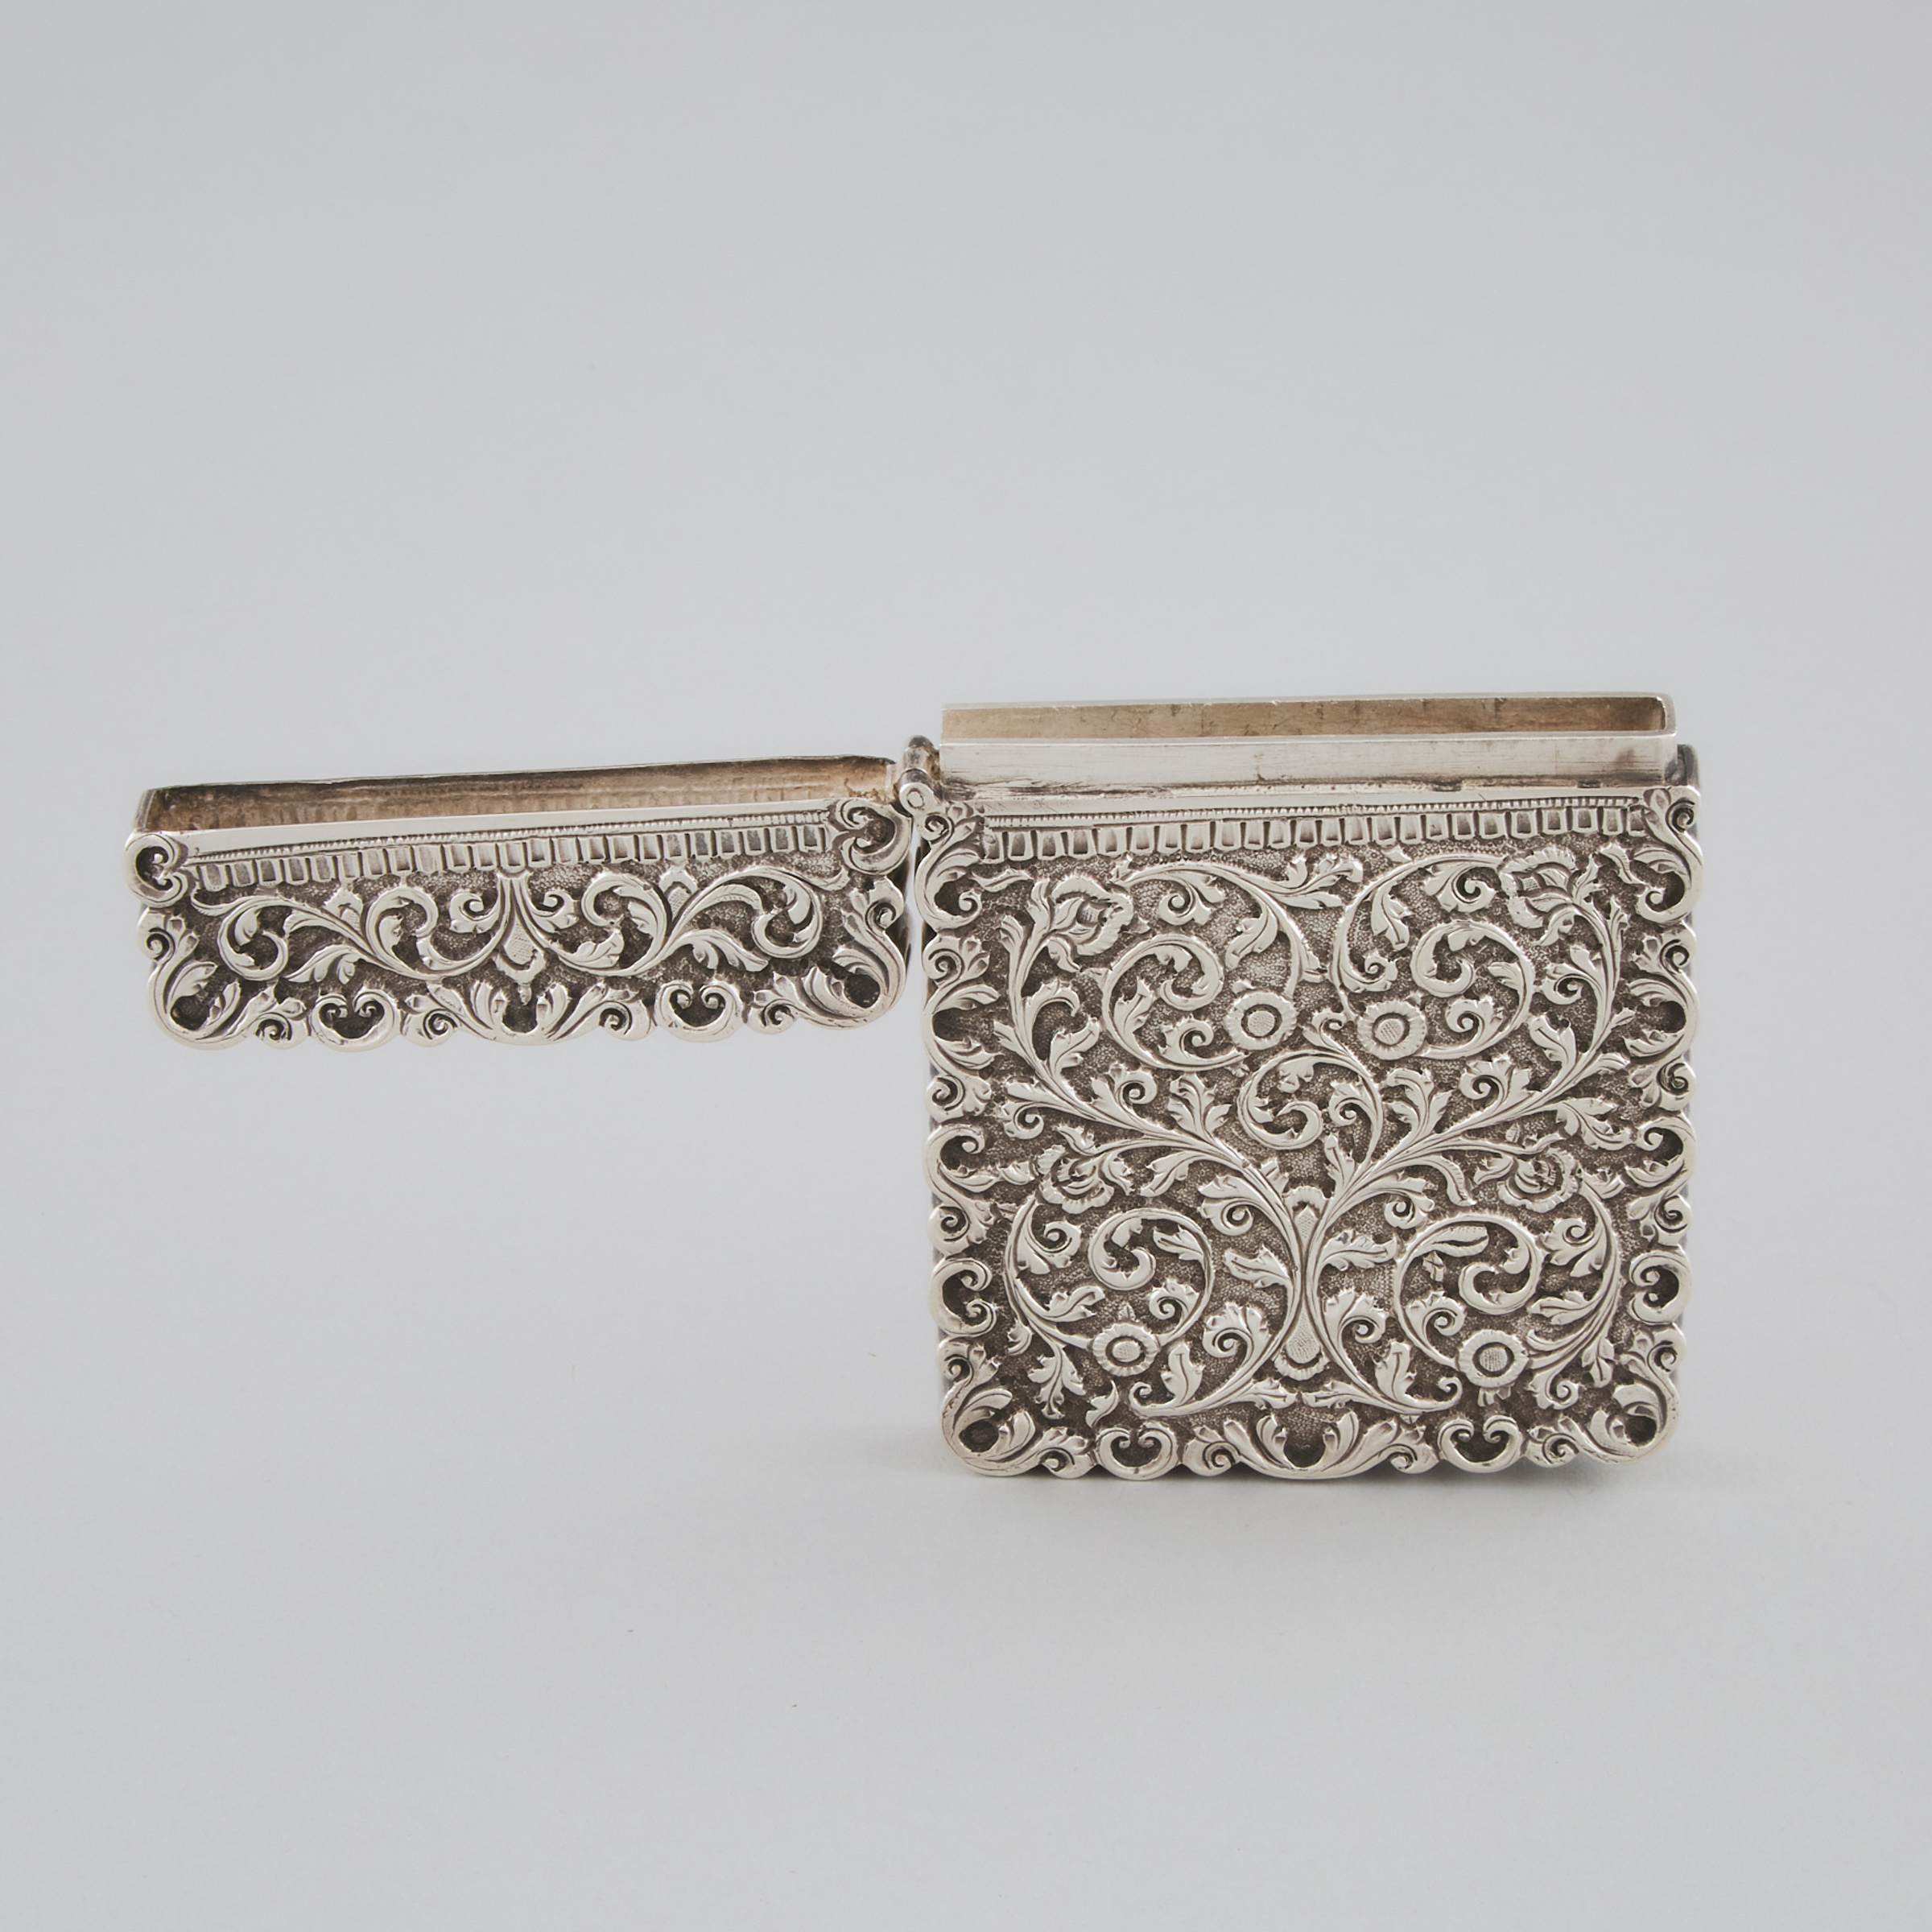 Indian Kutch Silver Card Case, late 19th century